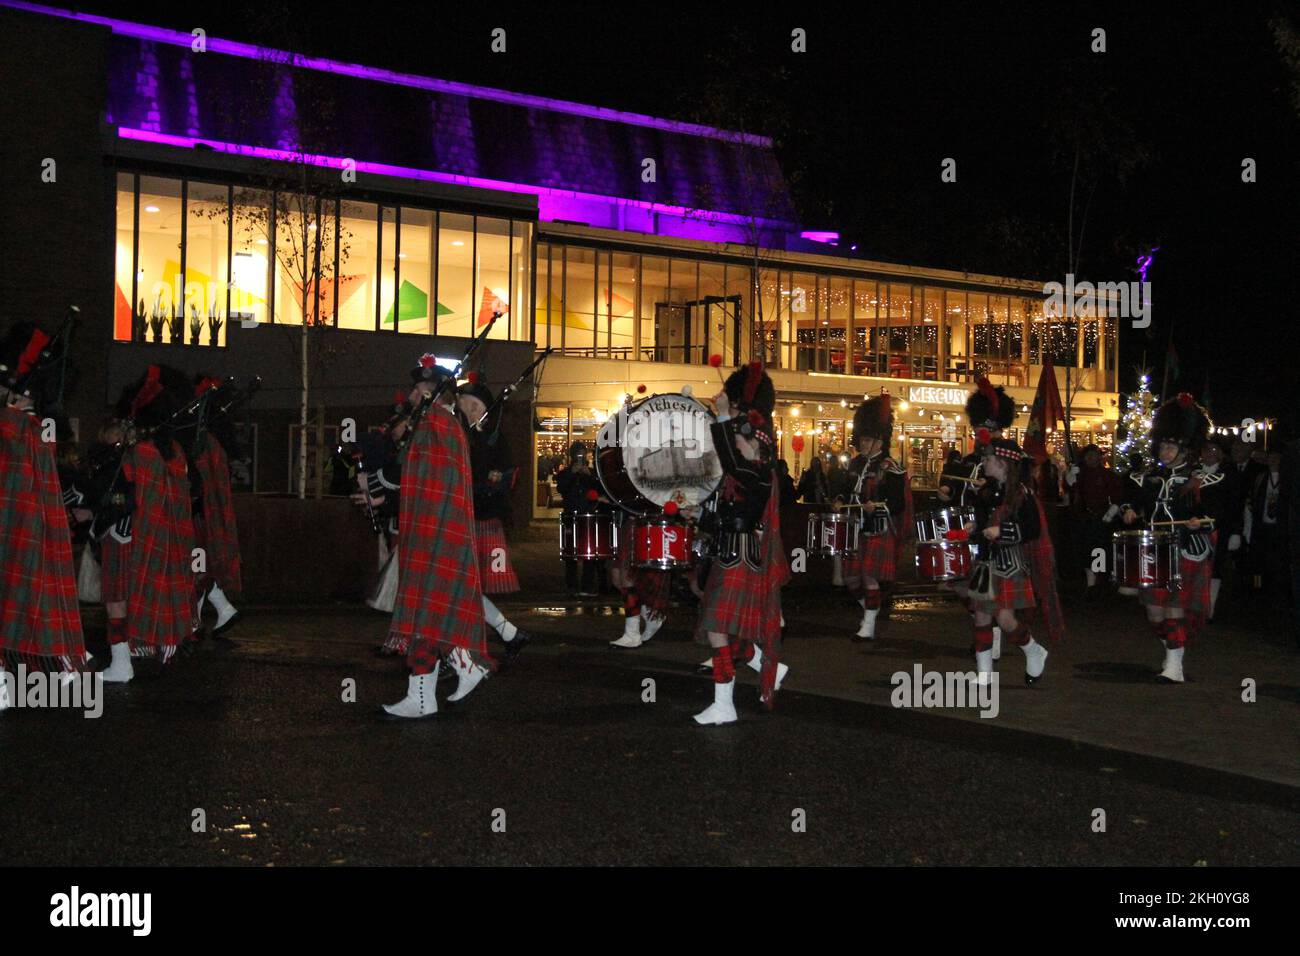 Colchester, UK. 23rd Nov 2022. Colchester, Britain's oldest recorded town, has officially become a city this evening after the letters patent were presented to the Mayor, Cllr Tim Young. A procession ahead of the ceremony left the Mercury Theatre and arrived at the Town Hall led by the Colchester Pipes and Drums band. Credit: Eastern Views/Alamy Live News Stock Photo